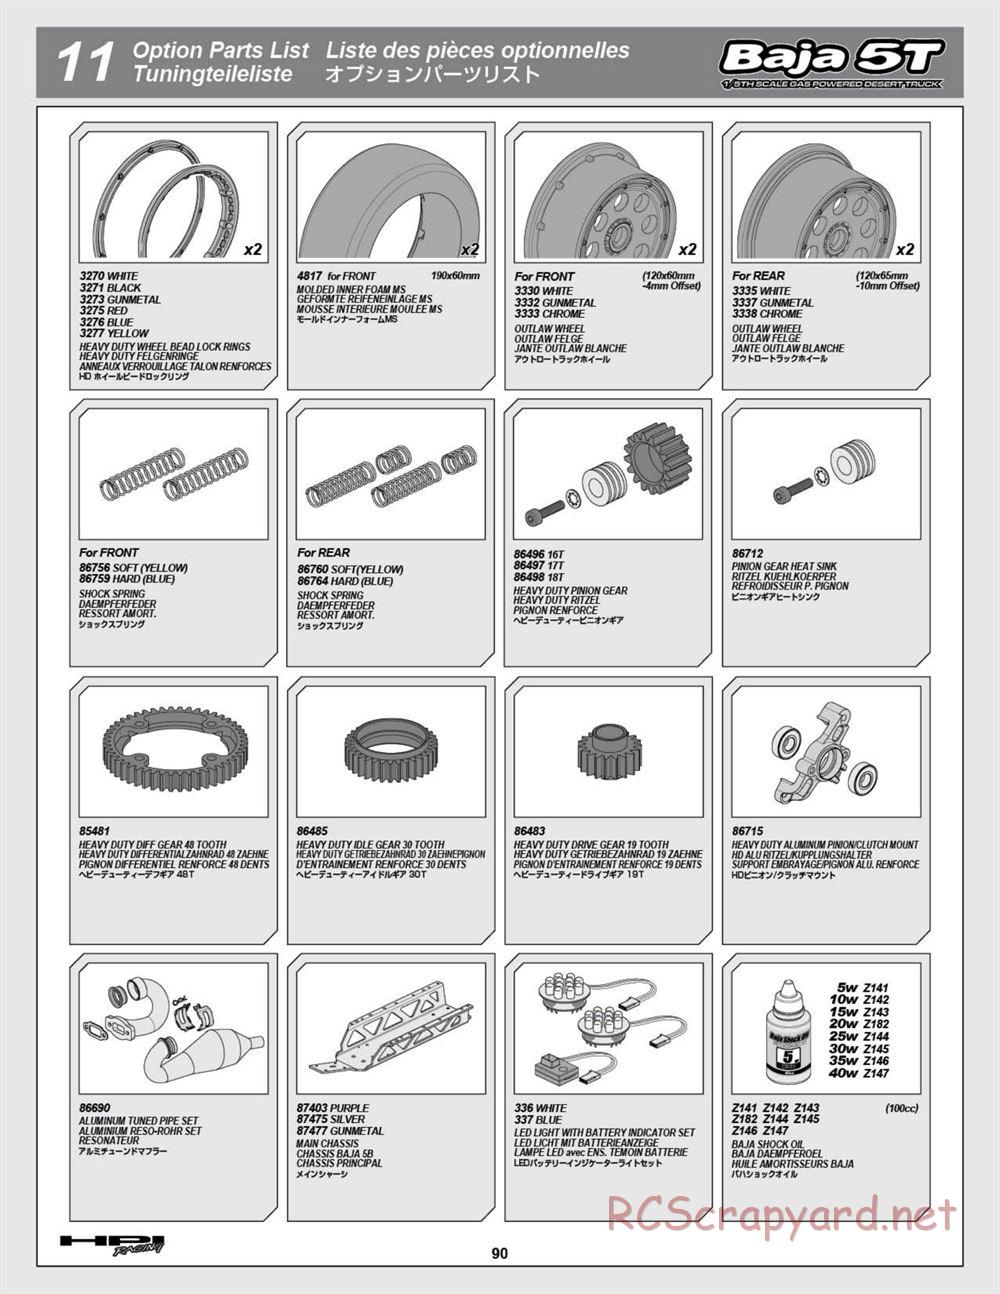 HPI - Baja 5T (2008) - Exploded View - Page 90